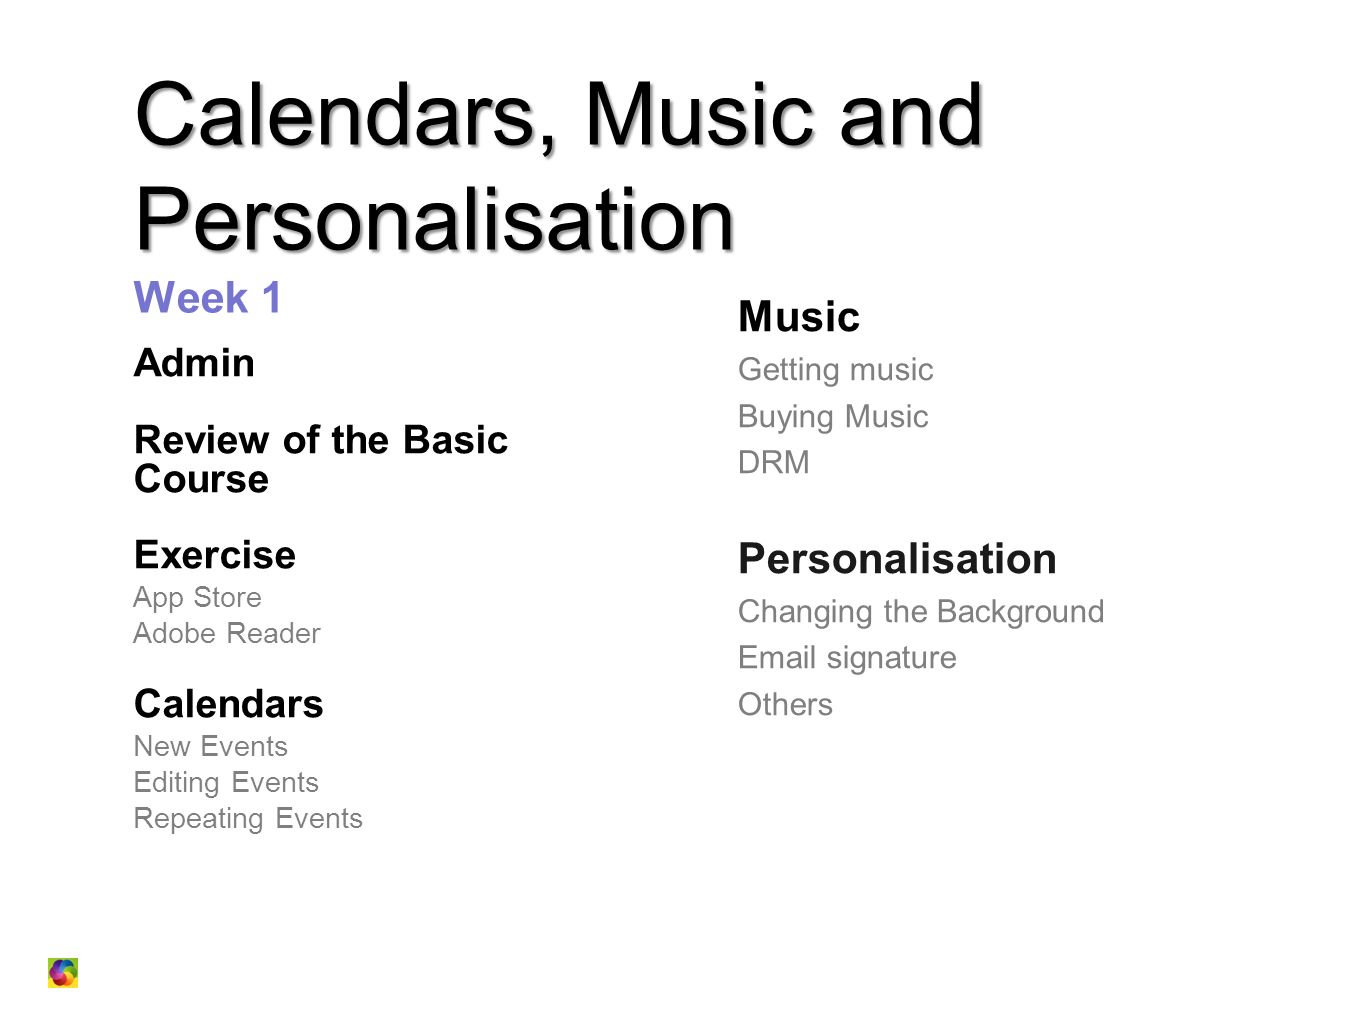 Calendars, Music and Personalisation Calendars, Music and Personalisation Week 1 Admin Review of the Basic Course Exercise App Store Adobe Reader Calendars New Events Editing Events Repeating Events Music Getting music Buying Music DRM Personalisation Changing the Background  signature Others